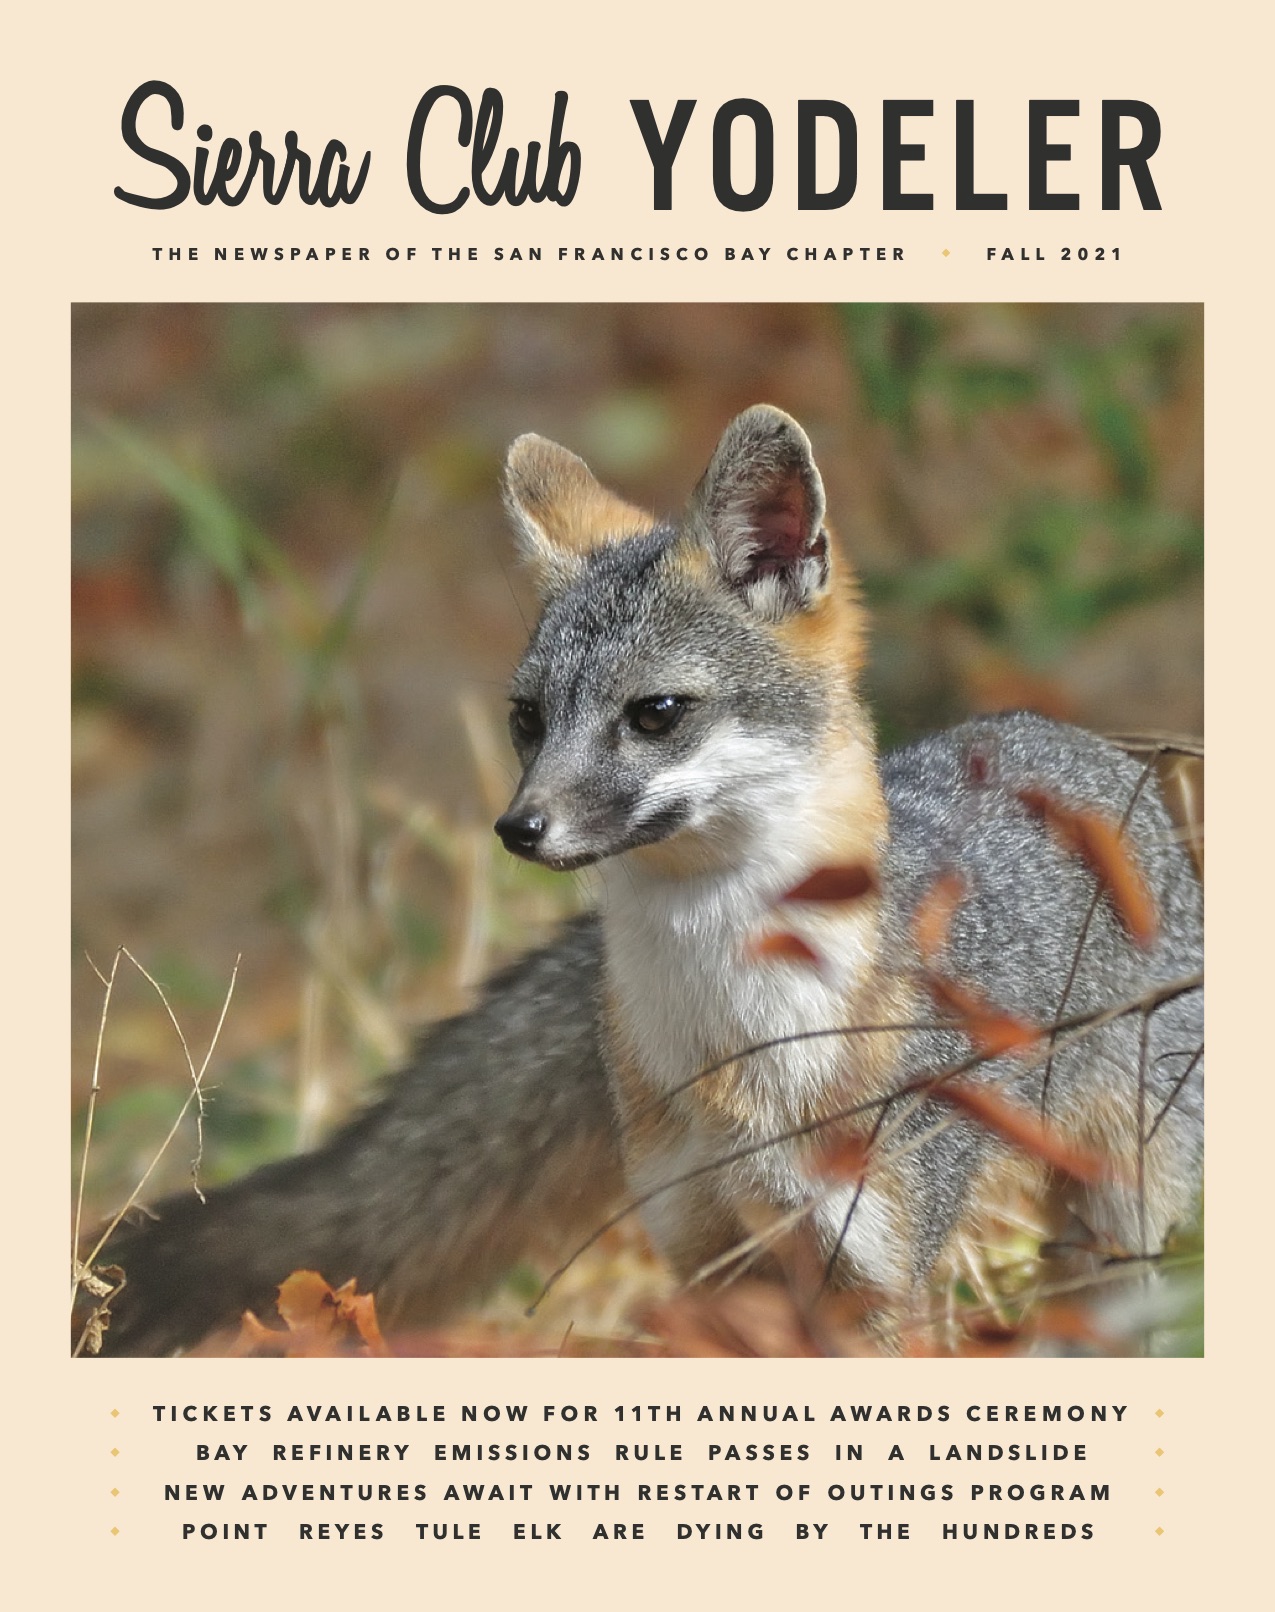 Front cover of Fall 2021 issue of the Yodeler with a gray fox on the cover.